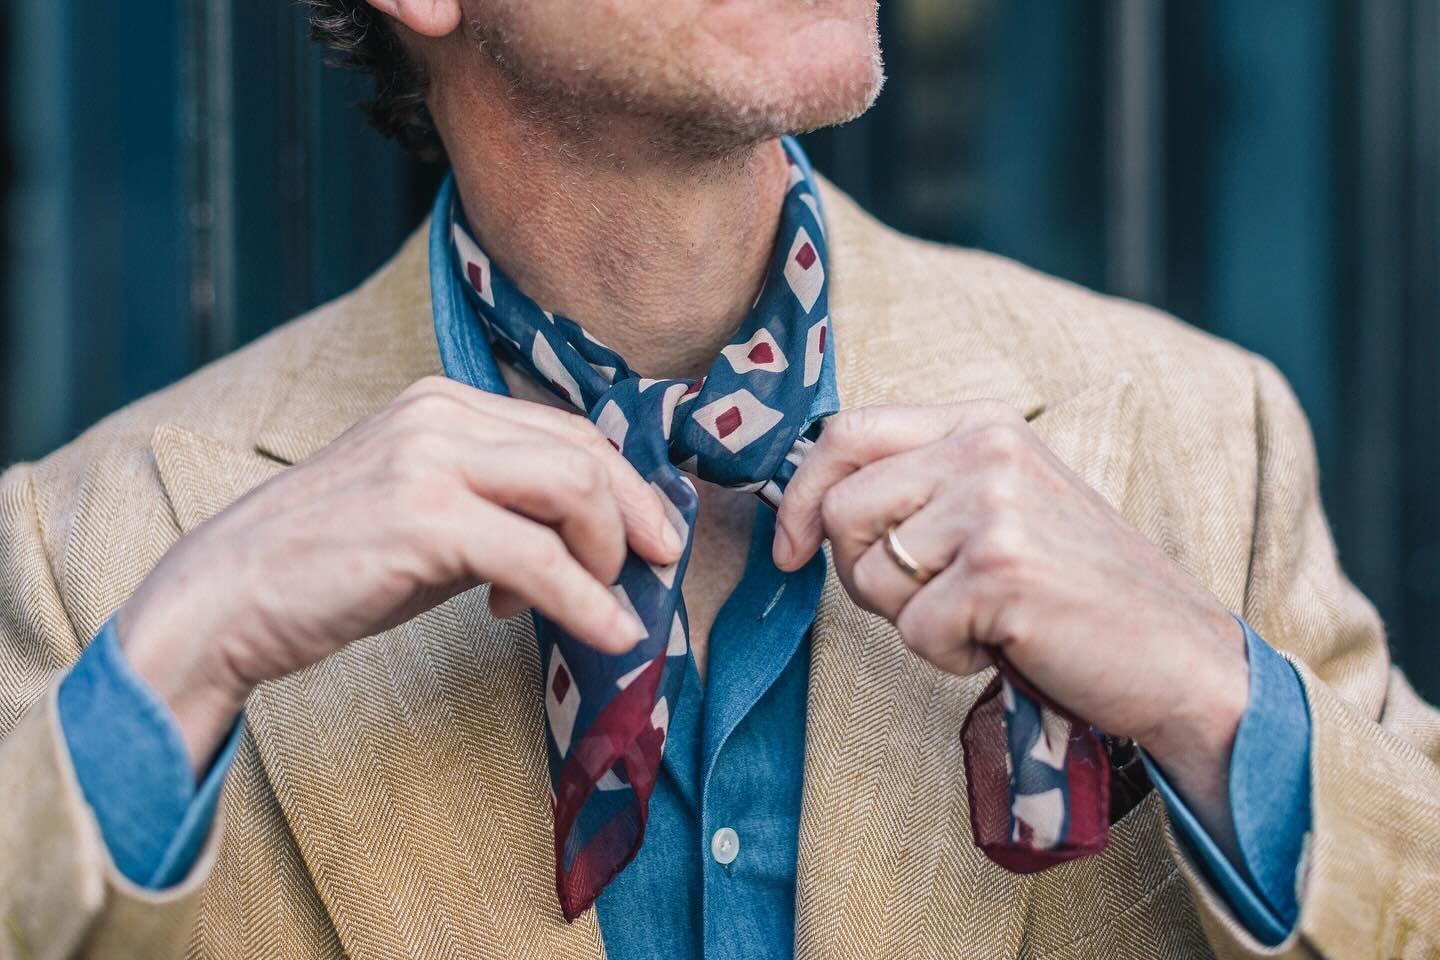 Under Dressed. 

When a Necktie can appear too much but sans Tie is not enough, consider the Neckerchief or Bandana as they say in Italy, your friend.

Handrcrafted with rolled edges using the finest silk/cotton fabric the jubilantly geometric patter